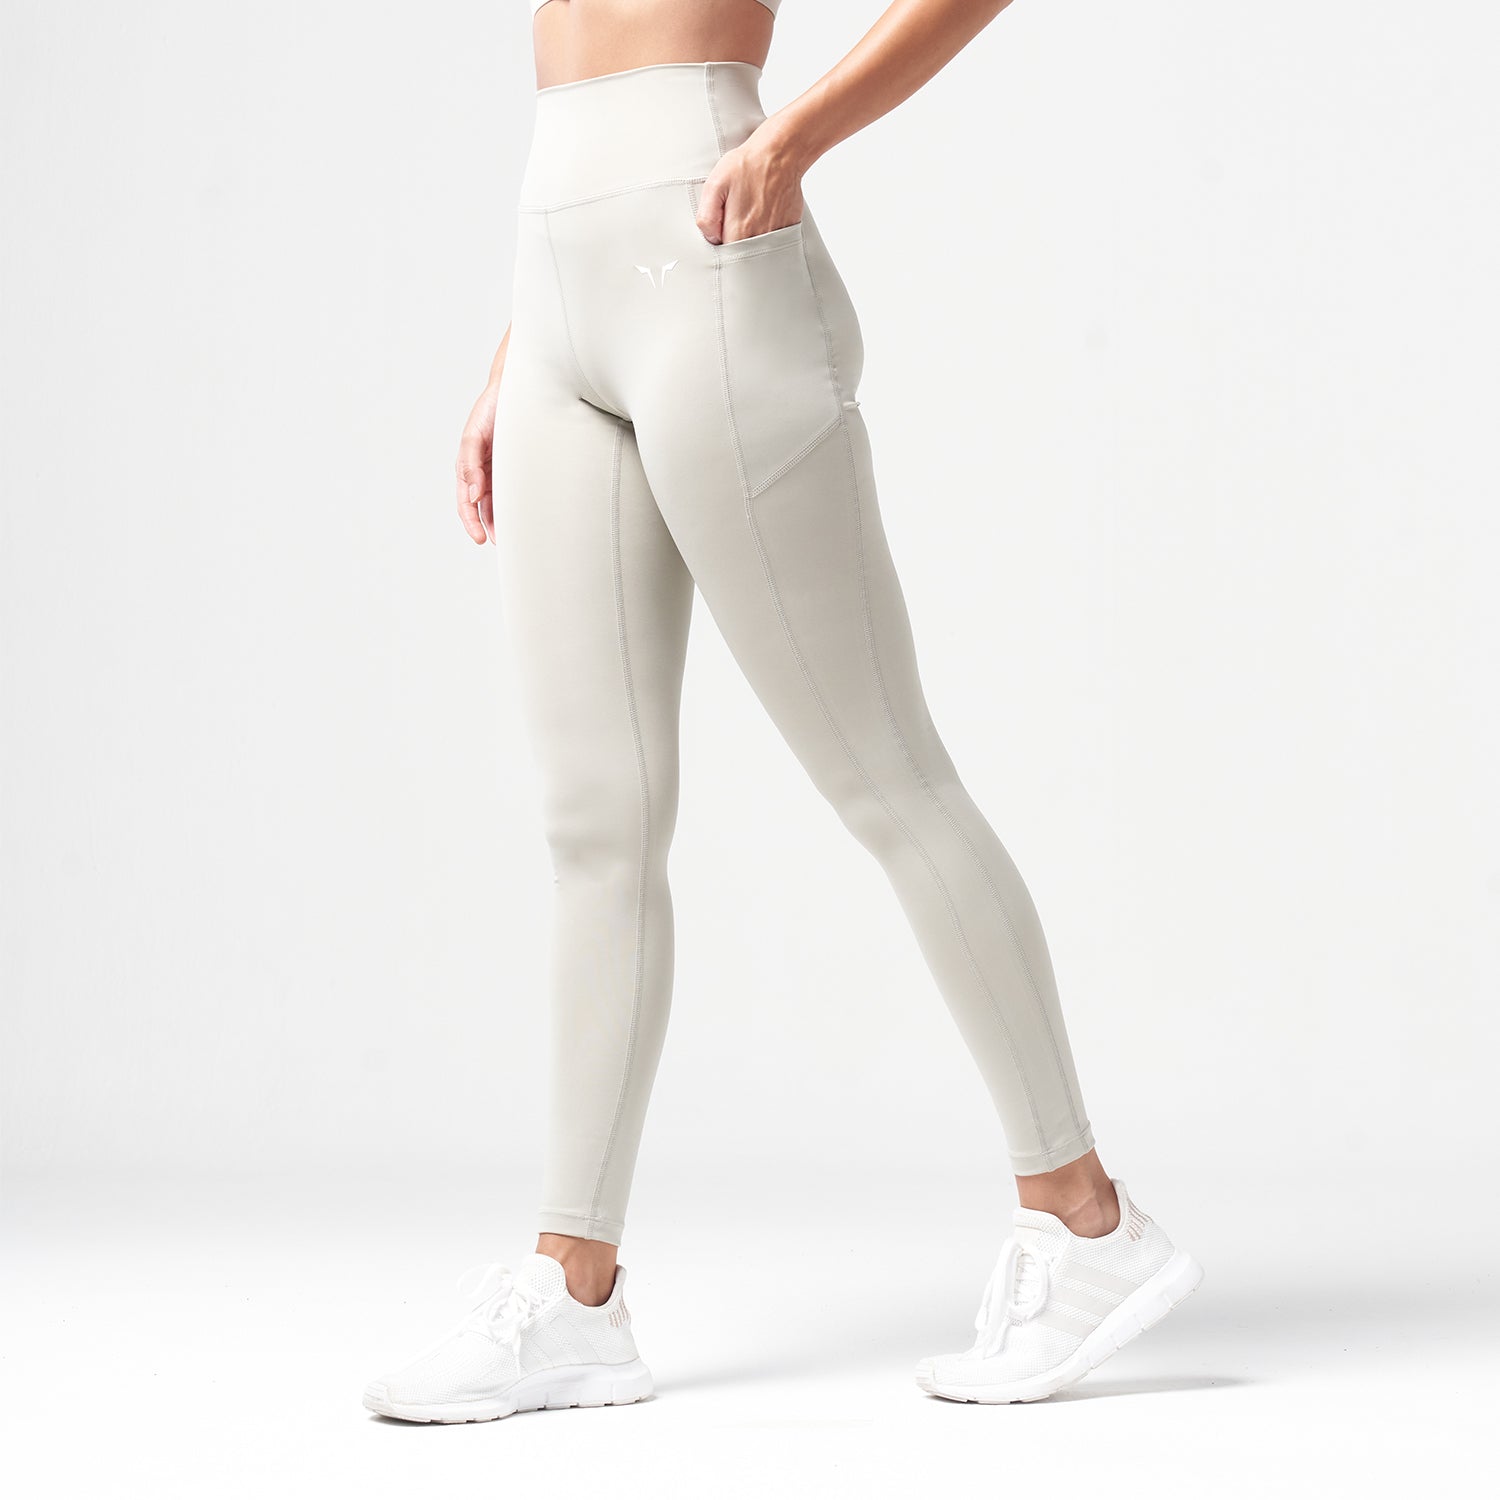 AE | Essential High Waisted Leggings - Willow Grey | Workout Leggings ...